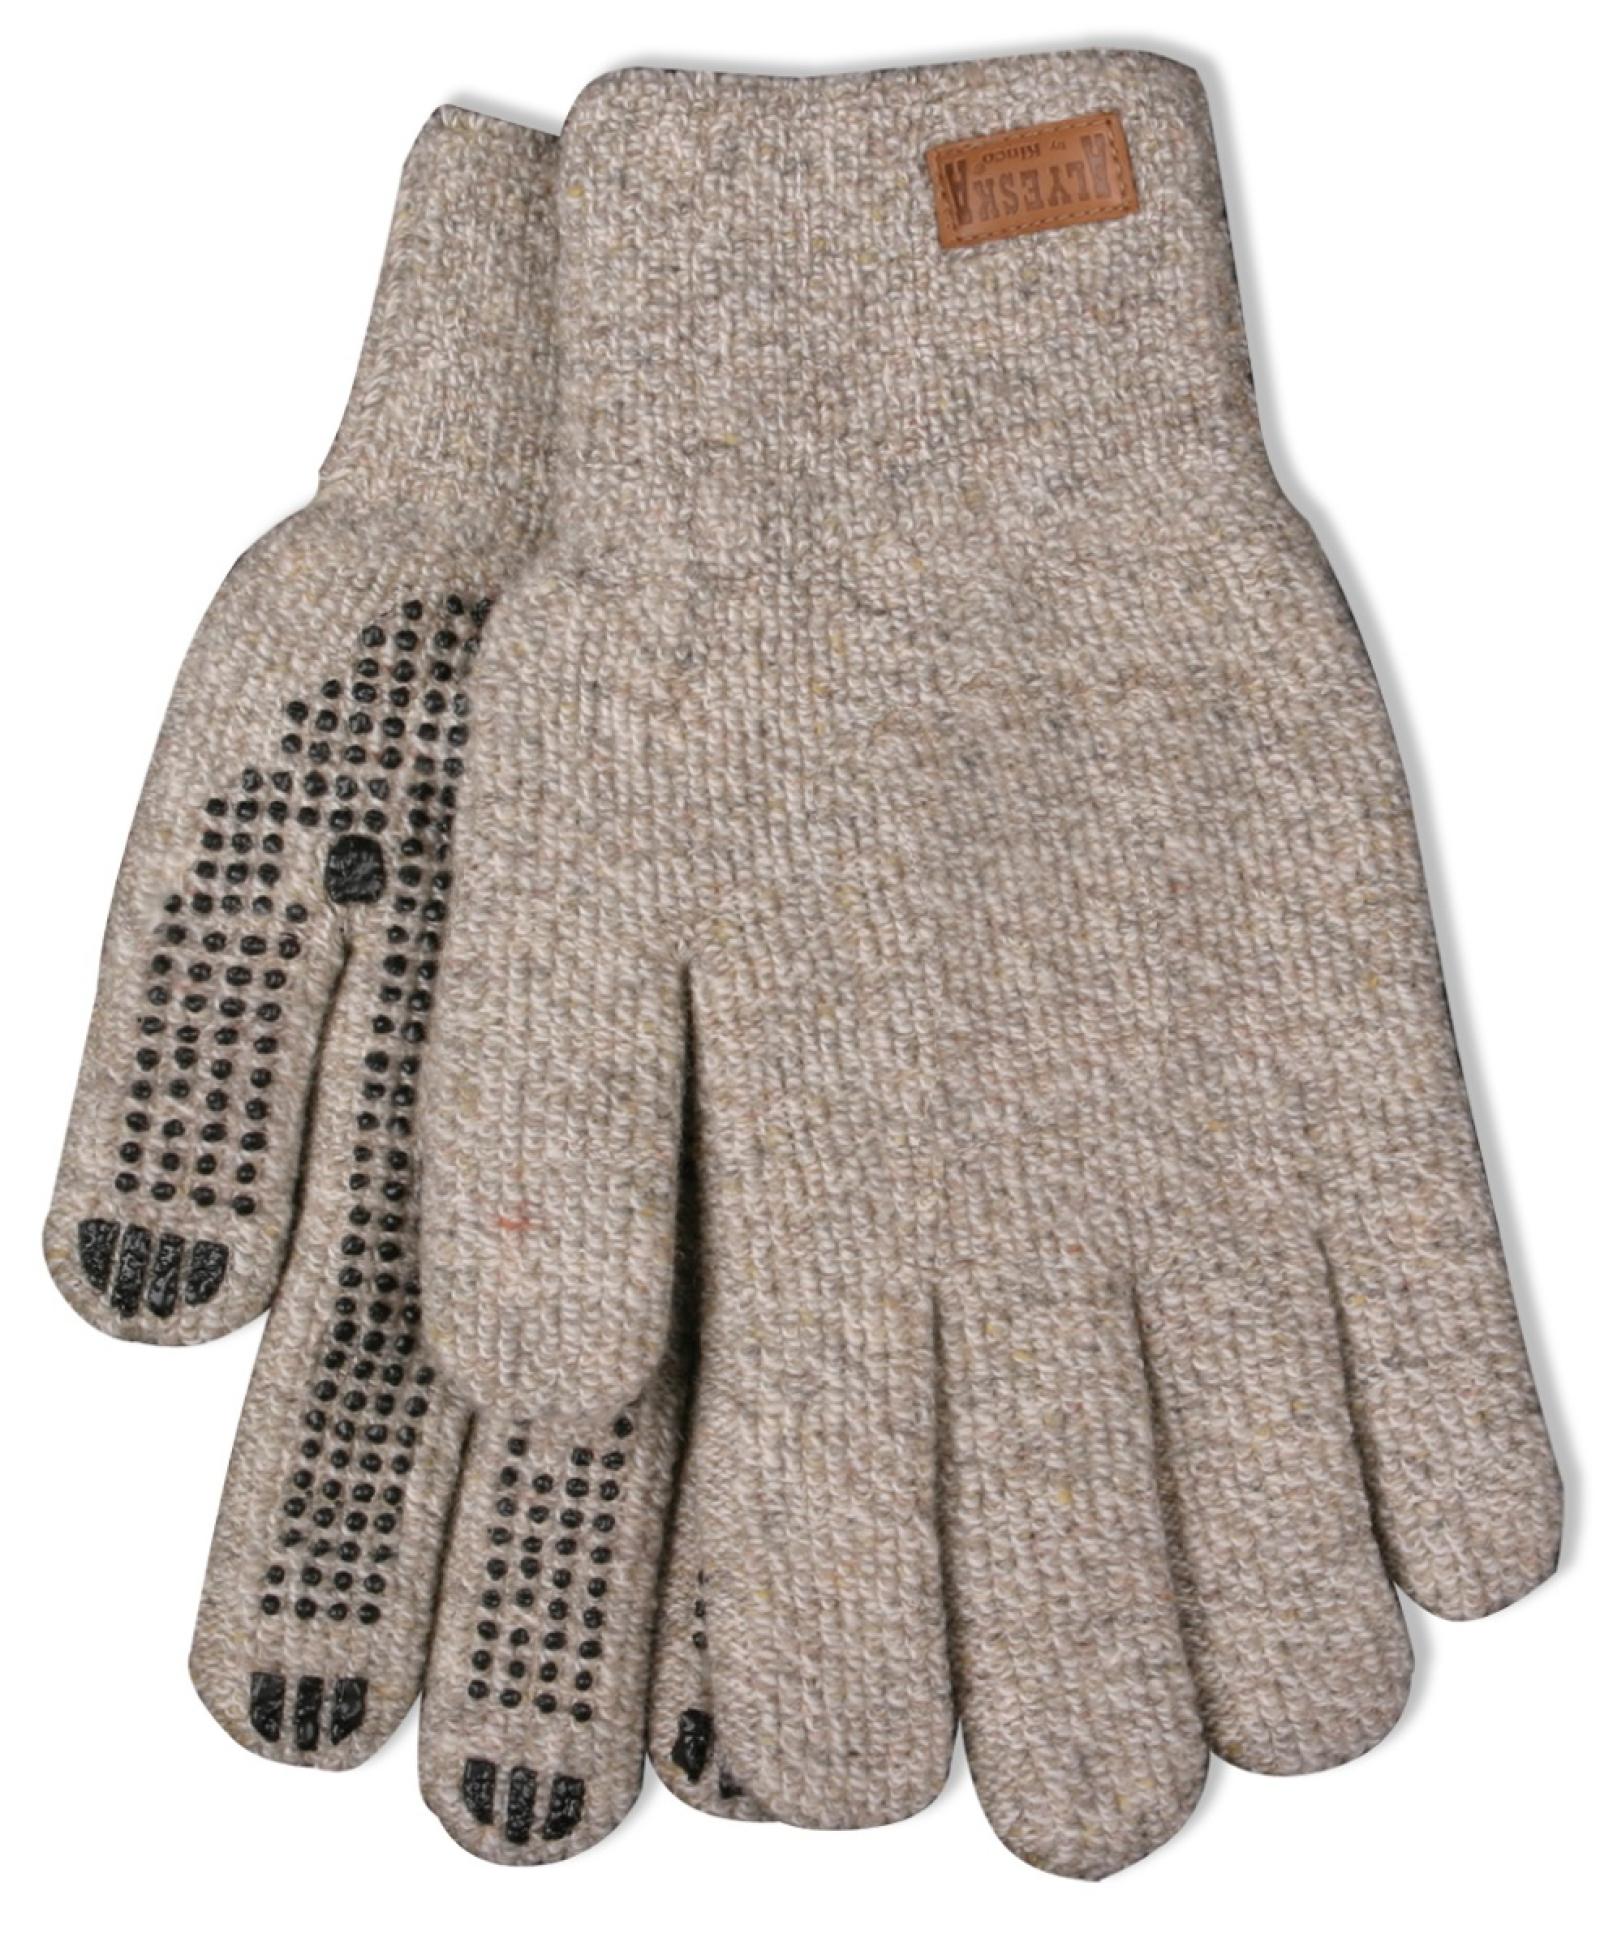 Kinco Men's Alyseka Lined Knit Glove